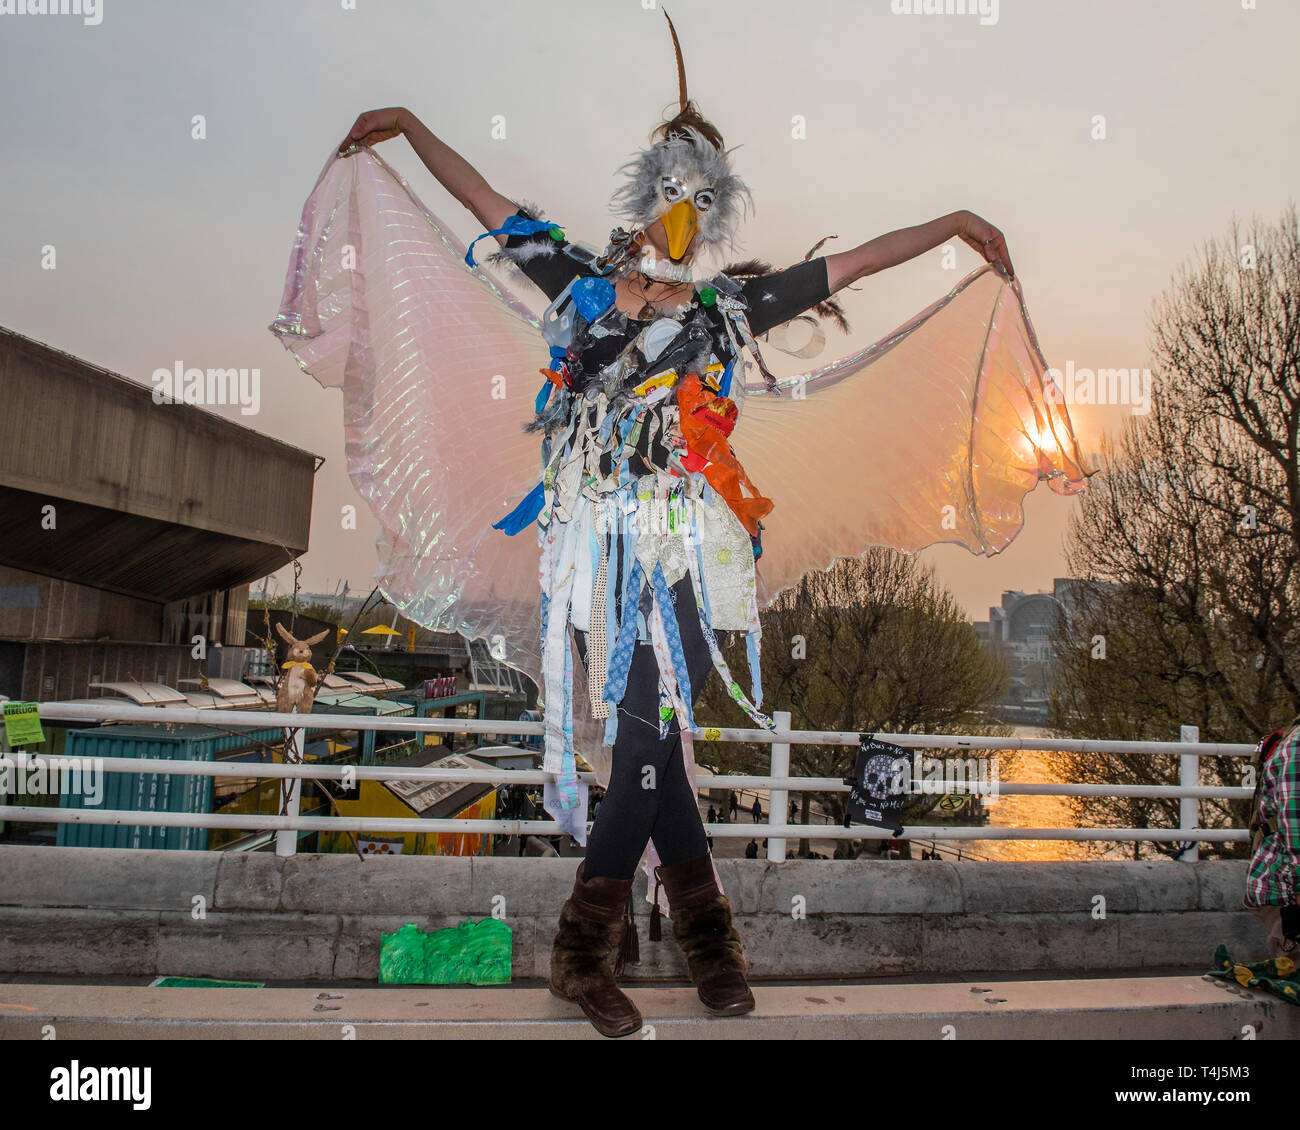 London, UK. 17th Apr, 2019. Dancers with dresses made out the plastic waste that is now being found in sea birds - The evening generally has a festival atmosphere - Day 3 - Protestors from Extinction Rebellion block several junctions in London as part of their ongoing protest to demand action by the UK Government on the 'climate chrisis'. The action is part of an international co-ordinated protest. Credit: Guy Bell/Alamy Live News Stock Photo